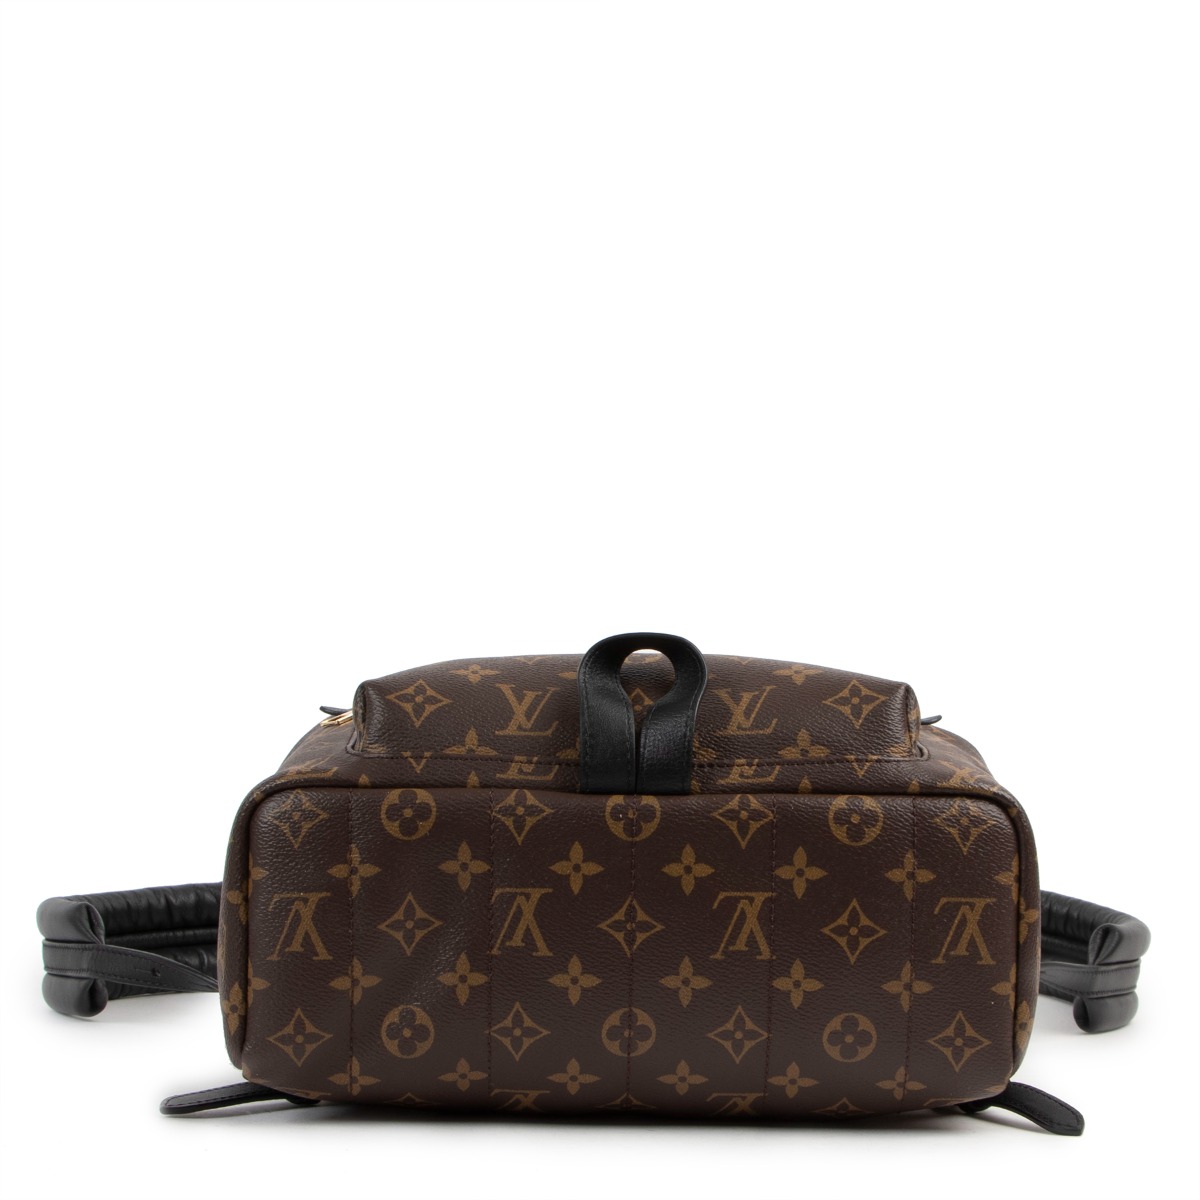 NEW! RARE Louis Vuitton Monogram Canvas MM Palm Springs Backpack-M44874 –  VALLEYSPORTING